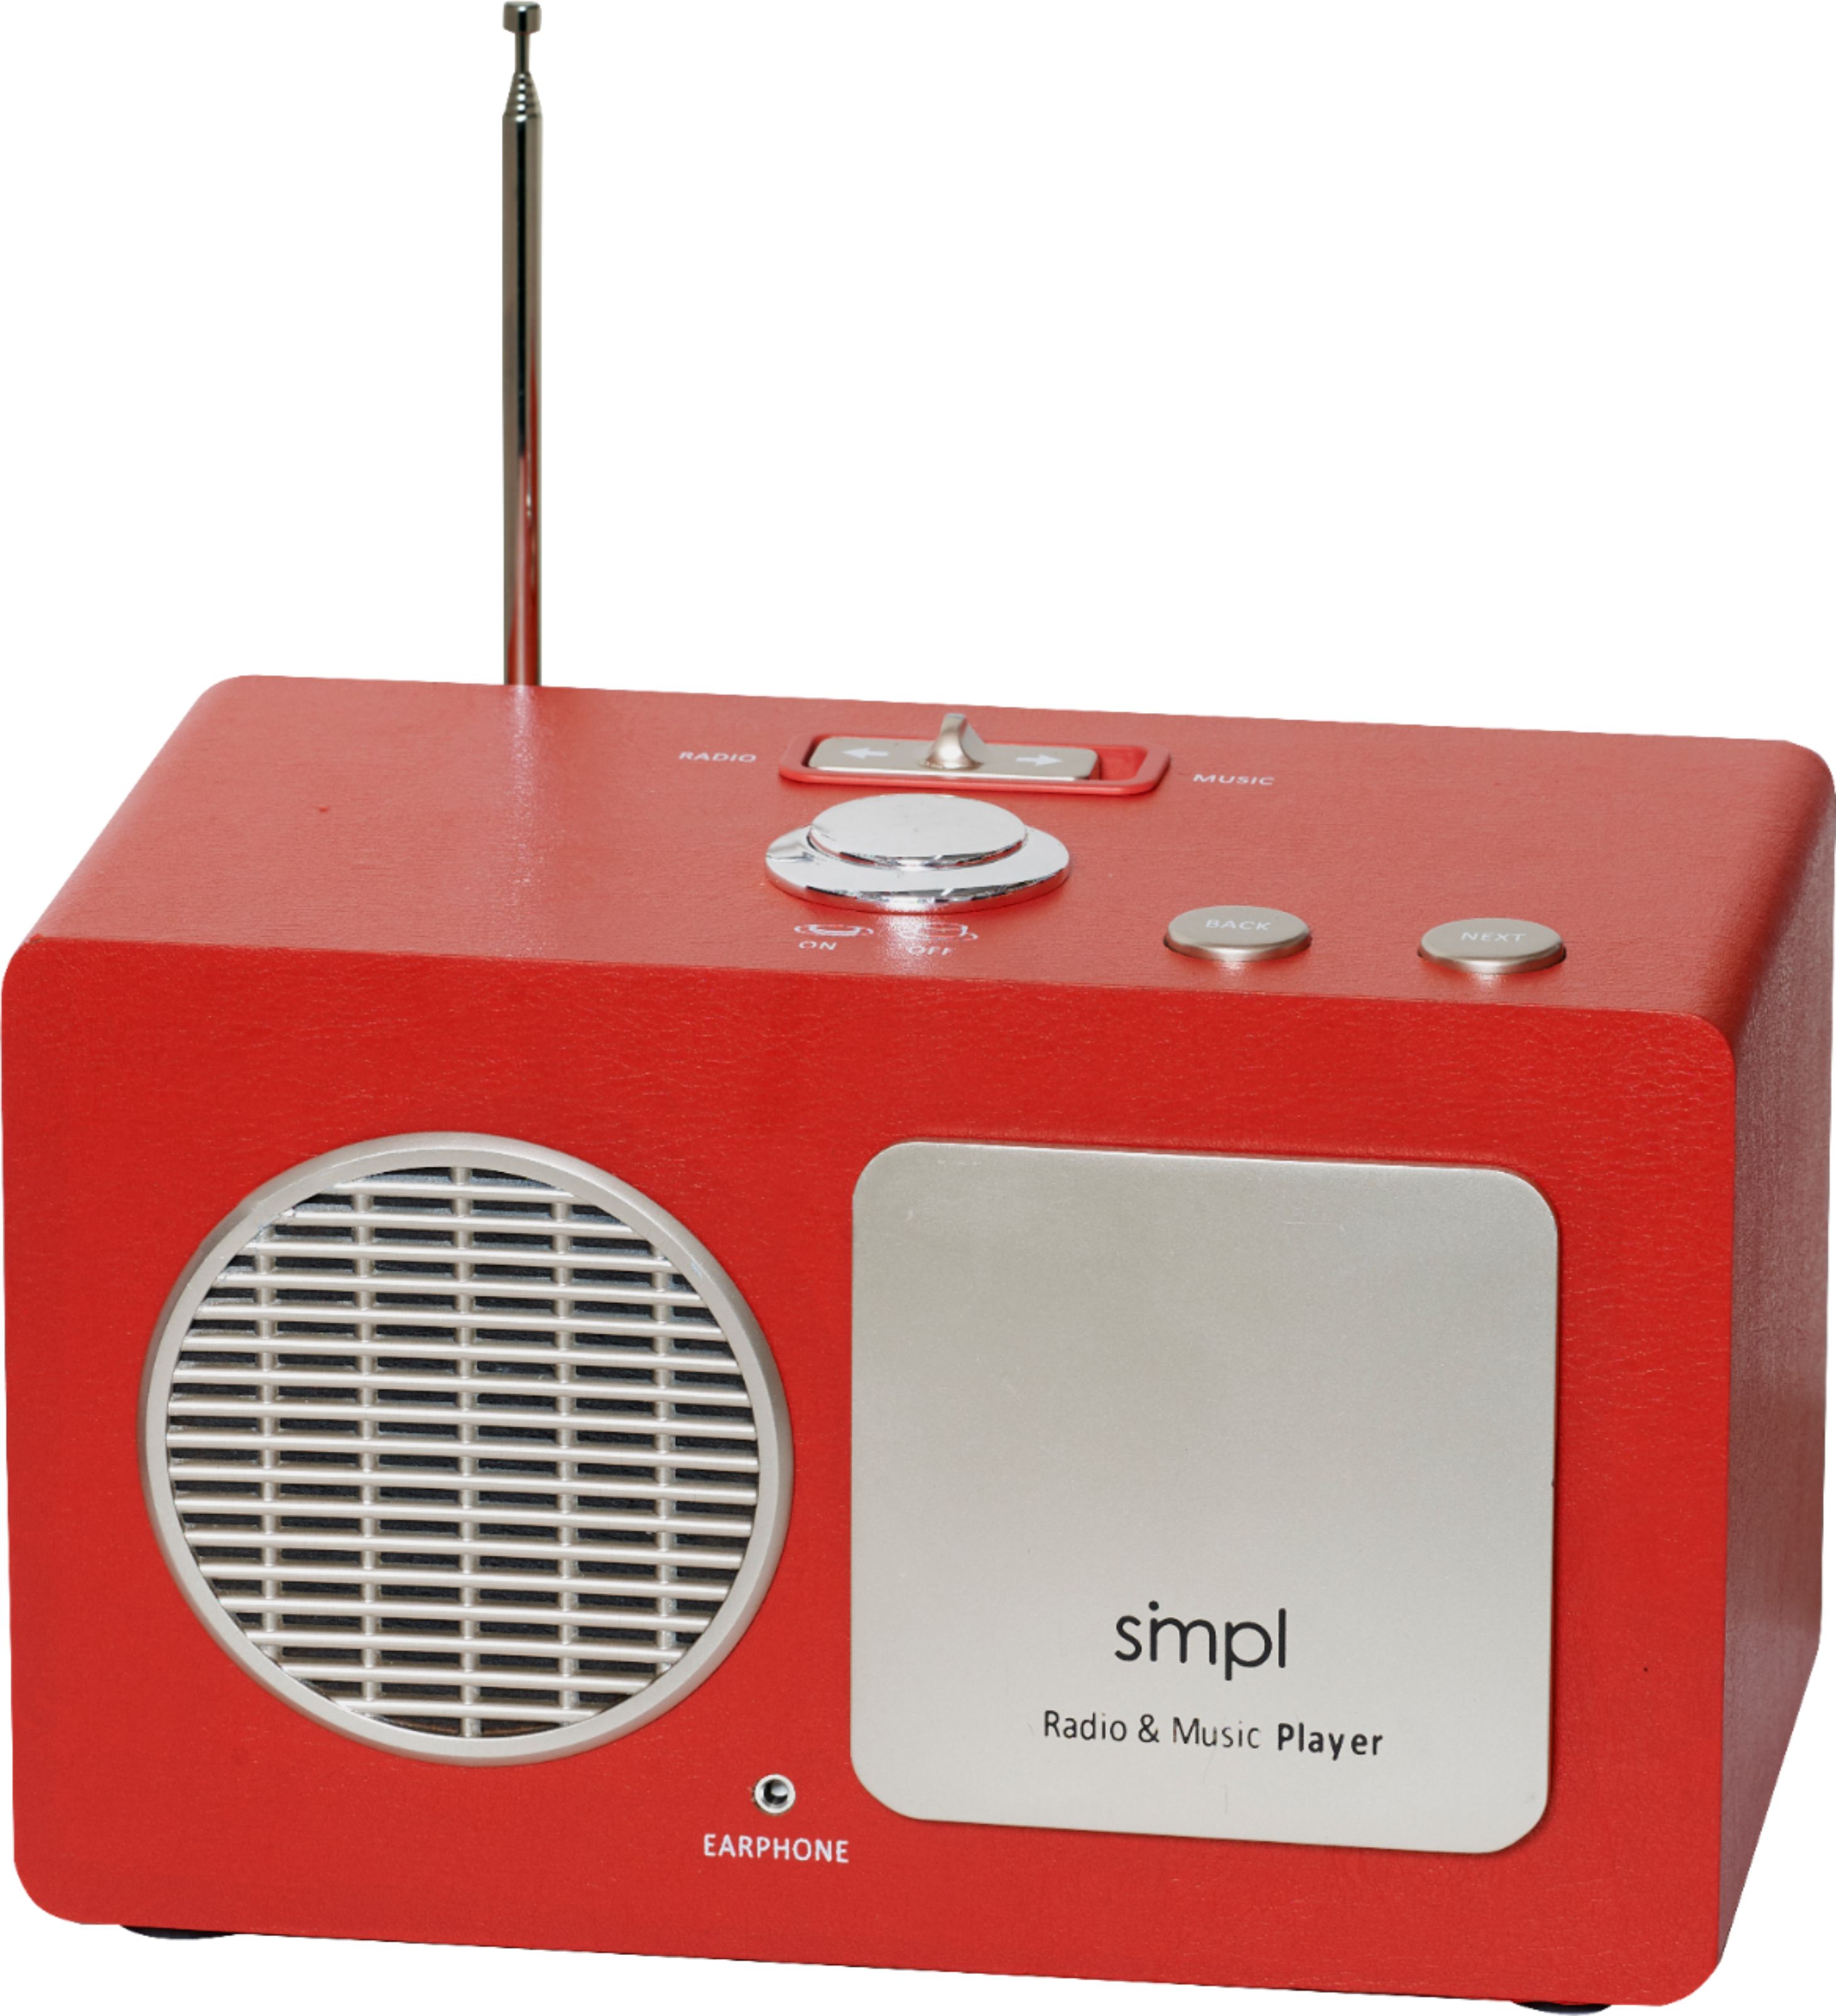 SMPL Music Player with AM/FM Radio Red 57025 - Best Buy